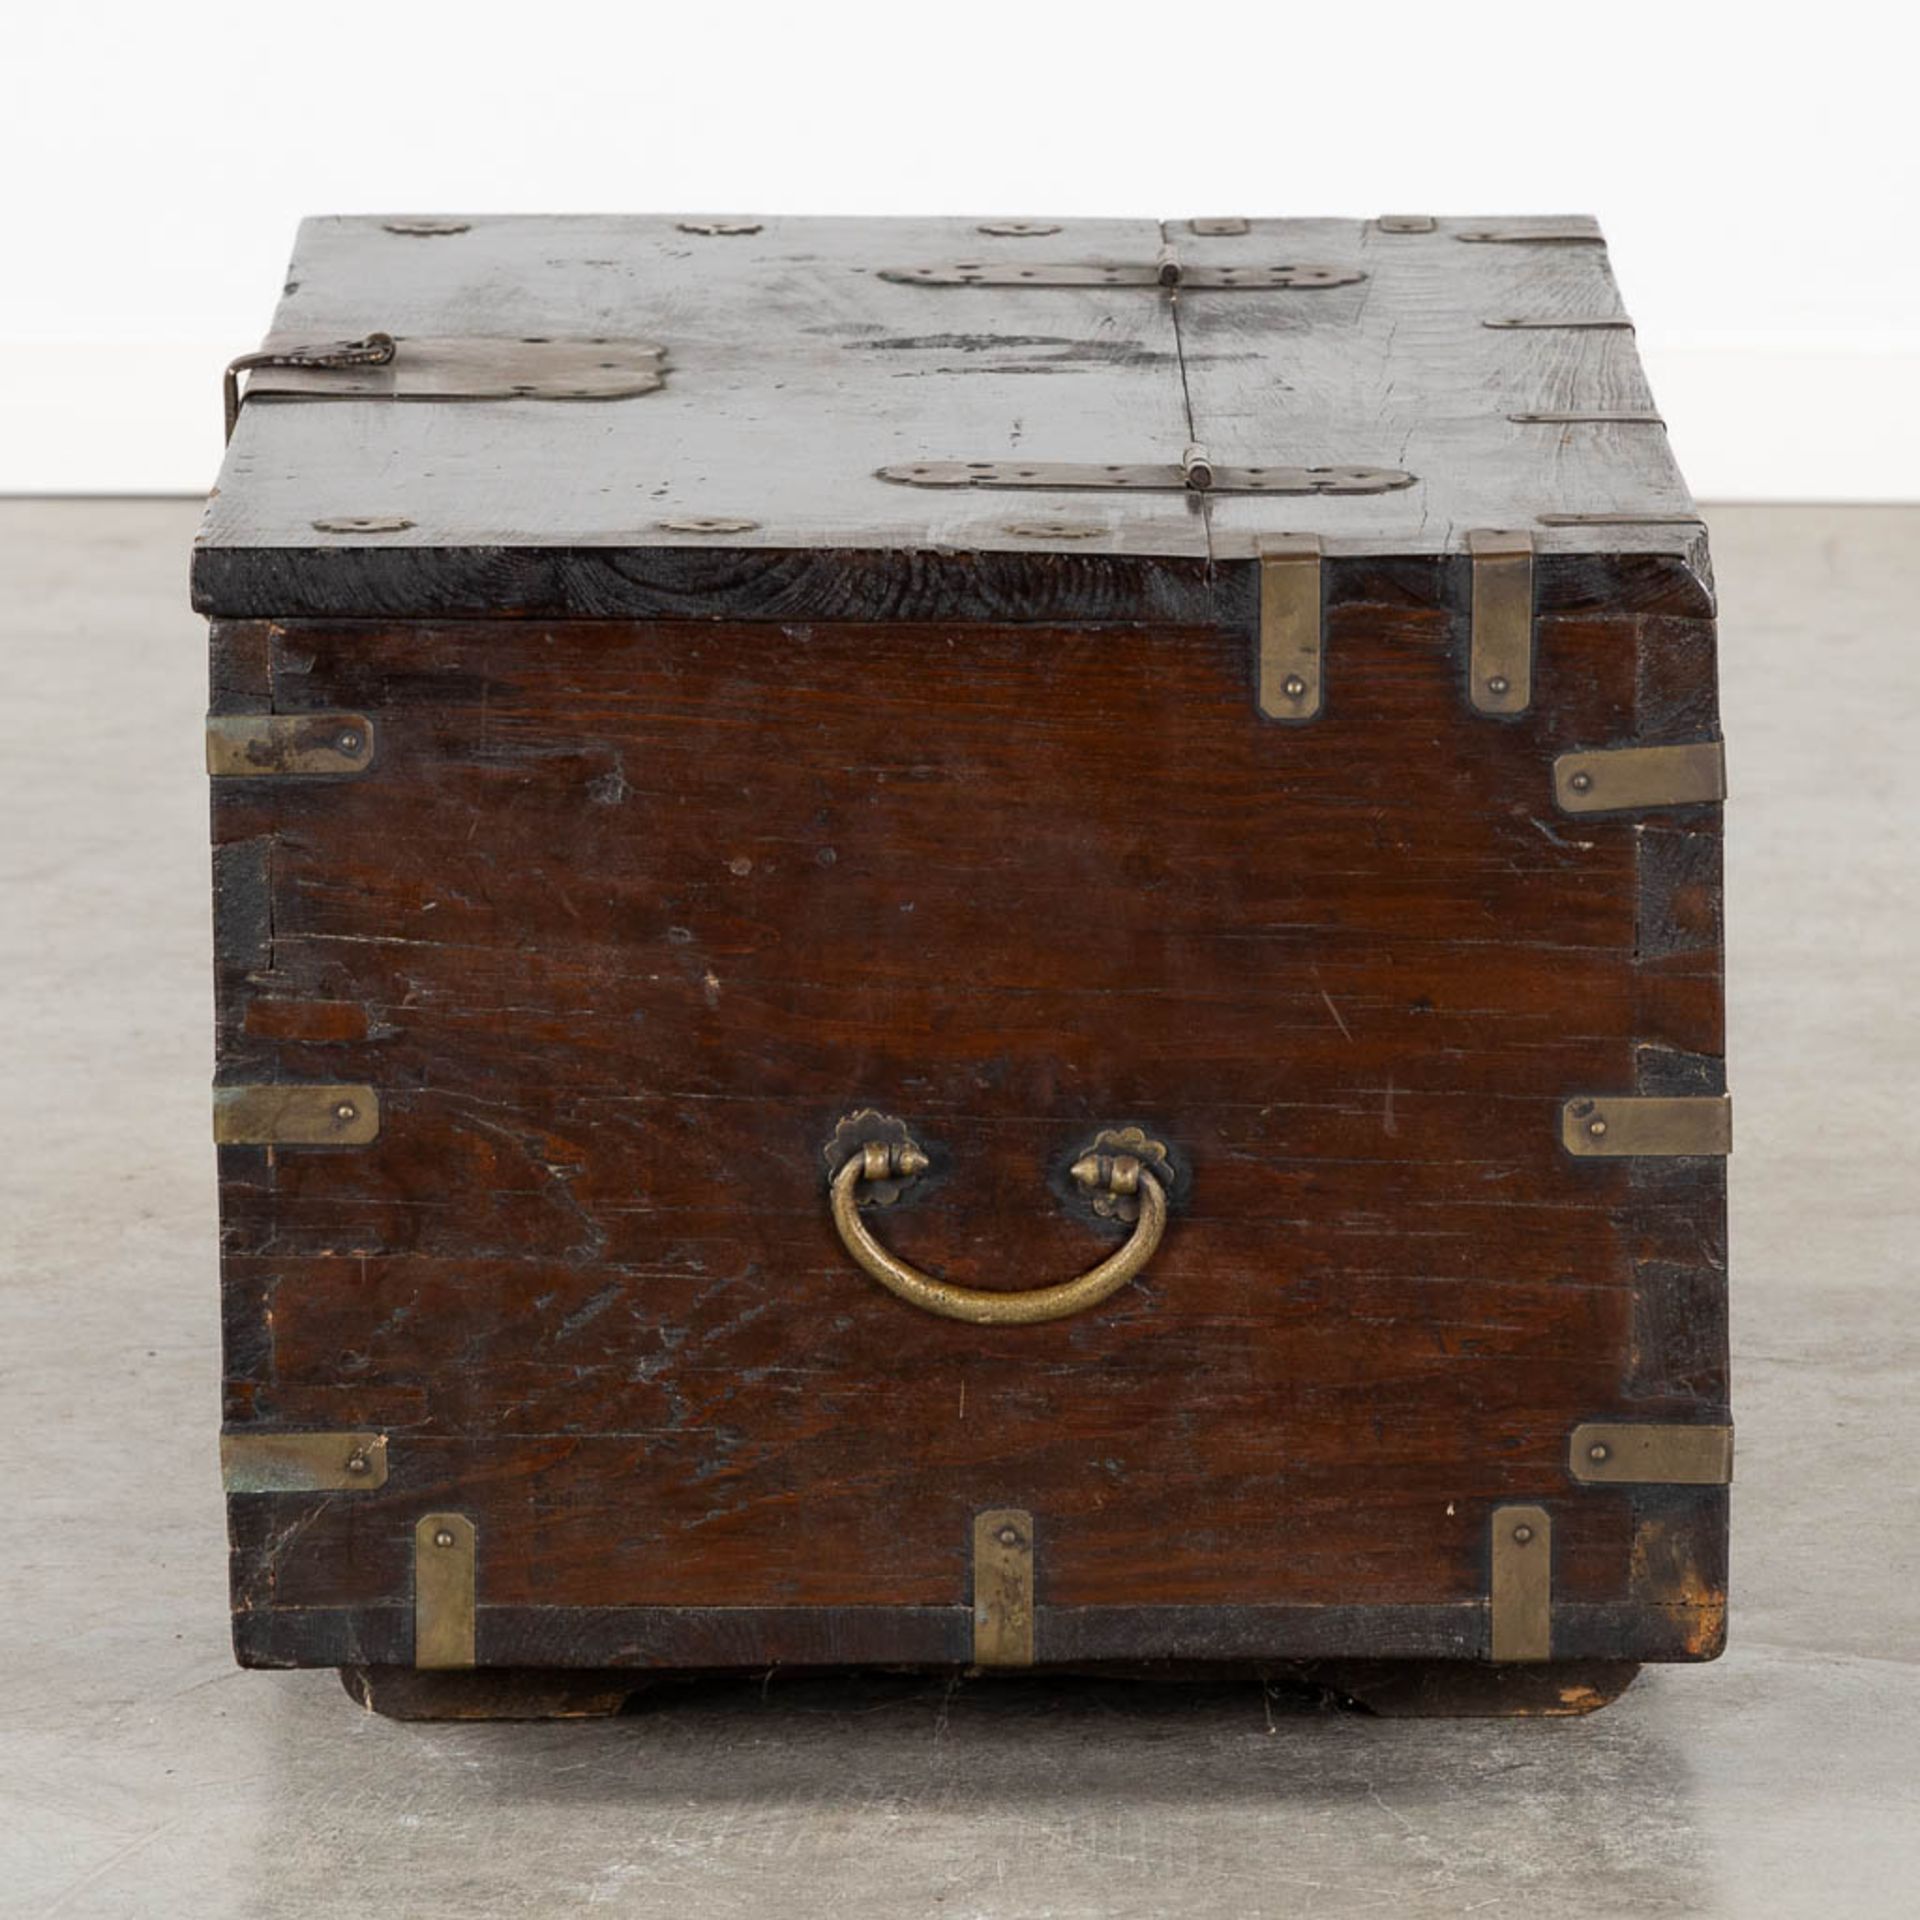 An antique Oriental chest with brass hardware. (L:43 x W:76 x H:40 cm) - Image 5 of 13